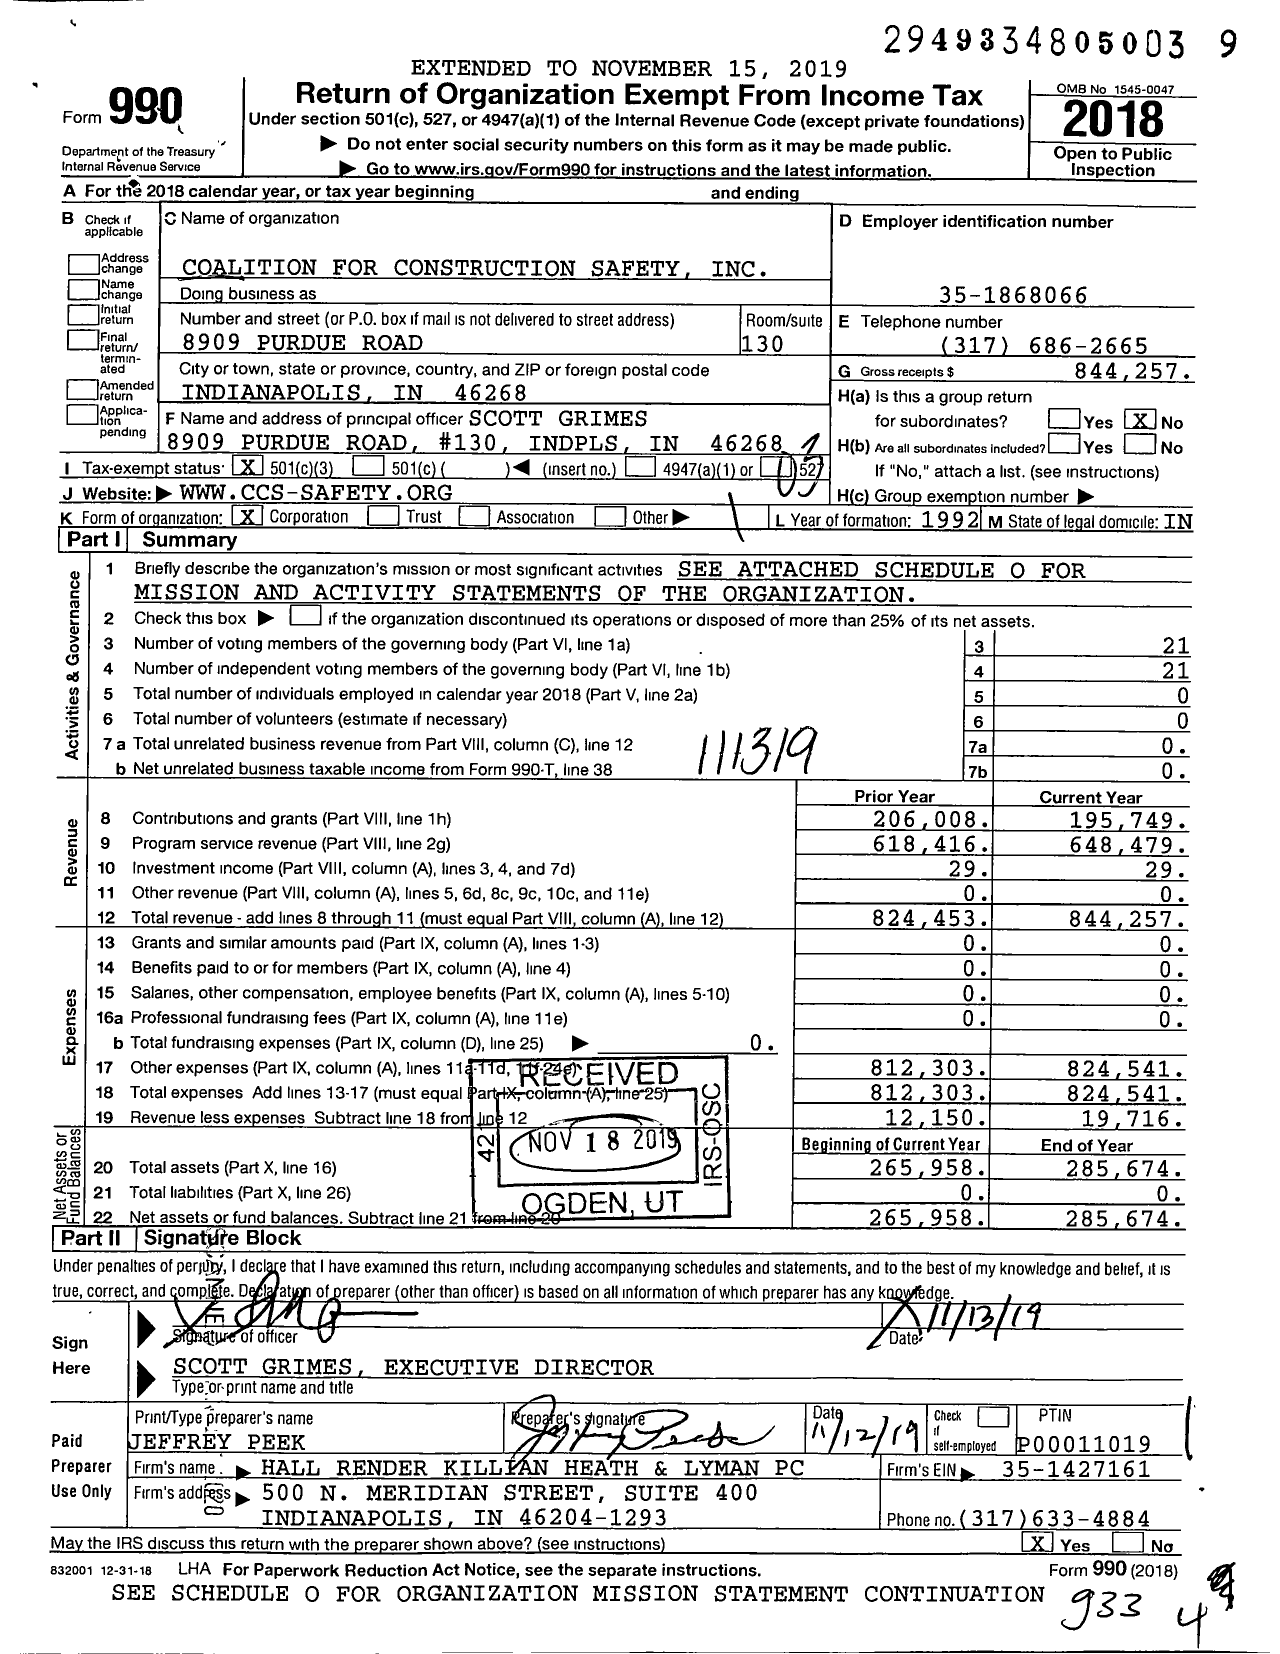 Image of first page of 2018 Form 990 for Coalition for Construction Safety